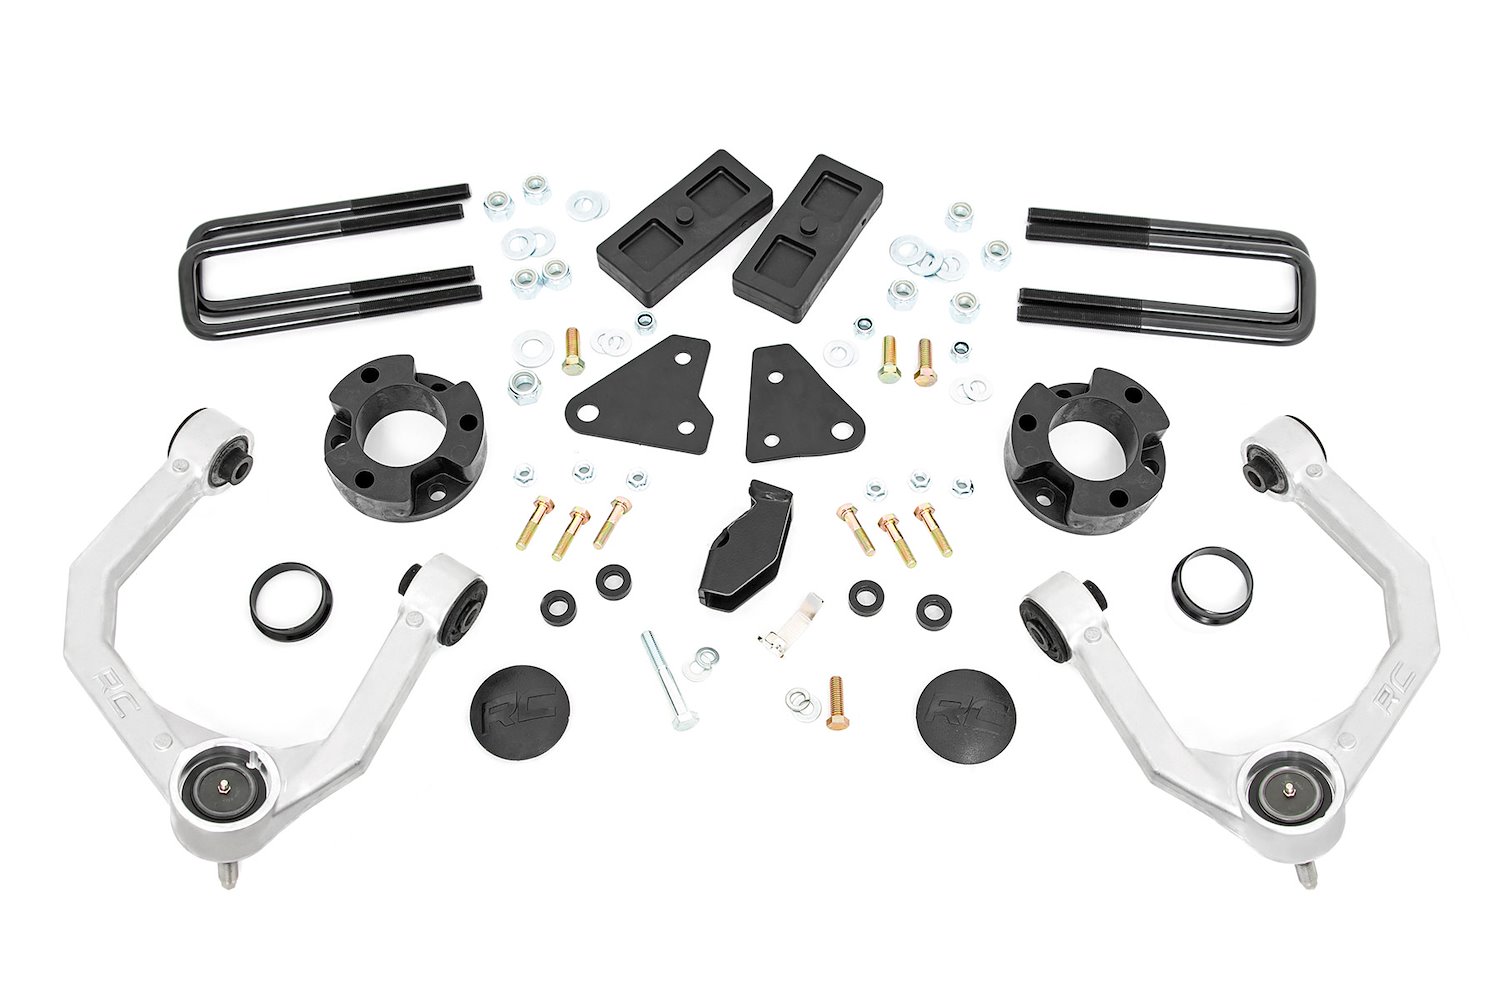 50002 3.5 in. Lift Kit, Forged Alum UCA, Cast Steel Knucles, Fits Select Ford Ranger